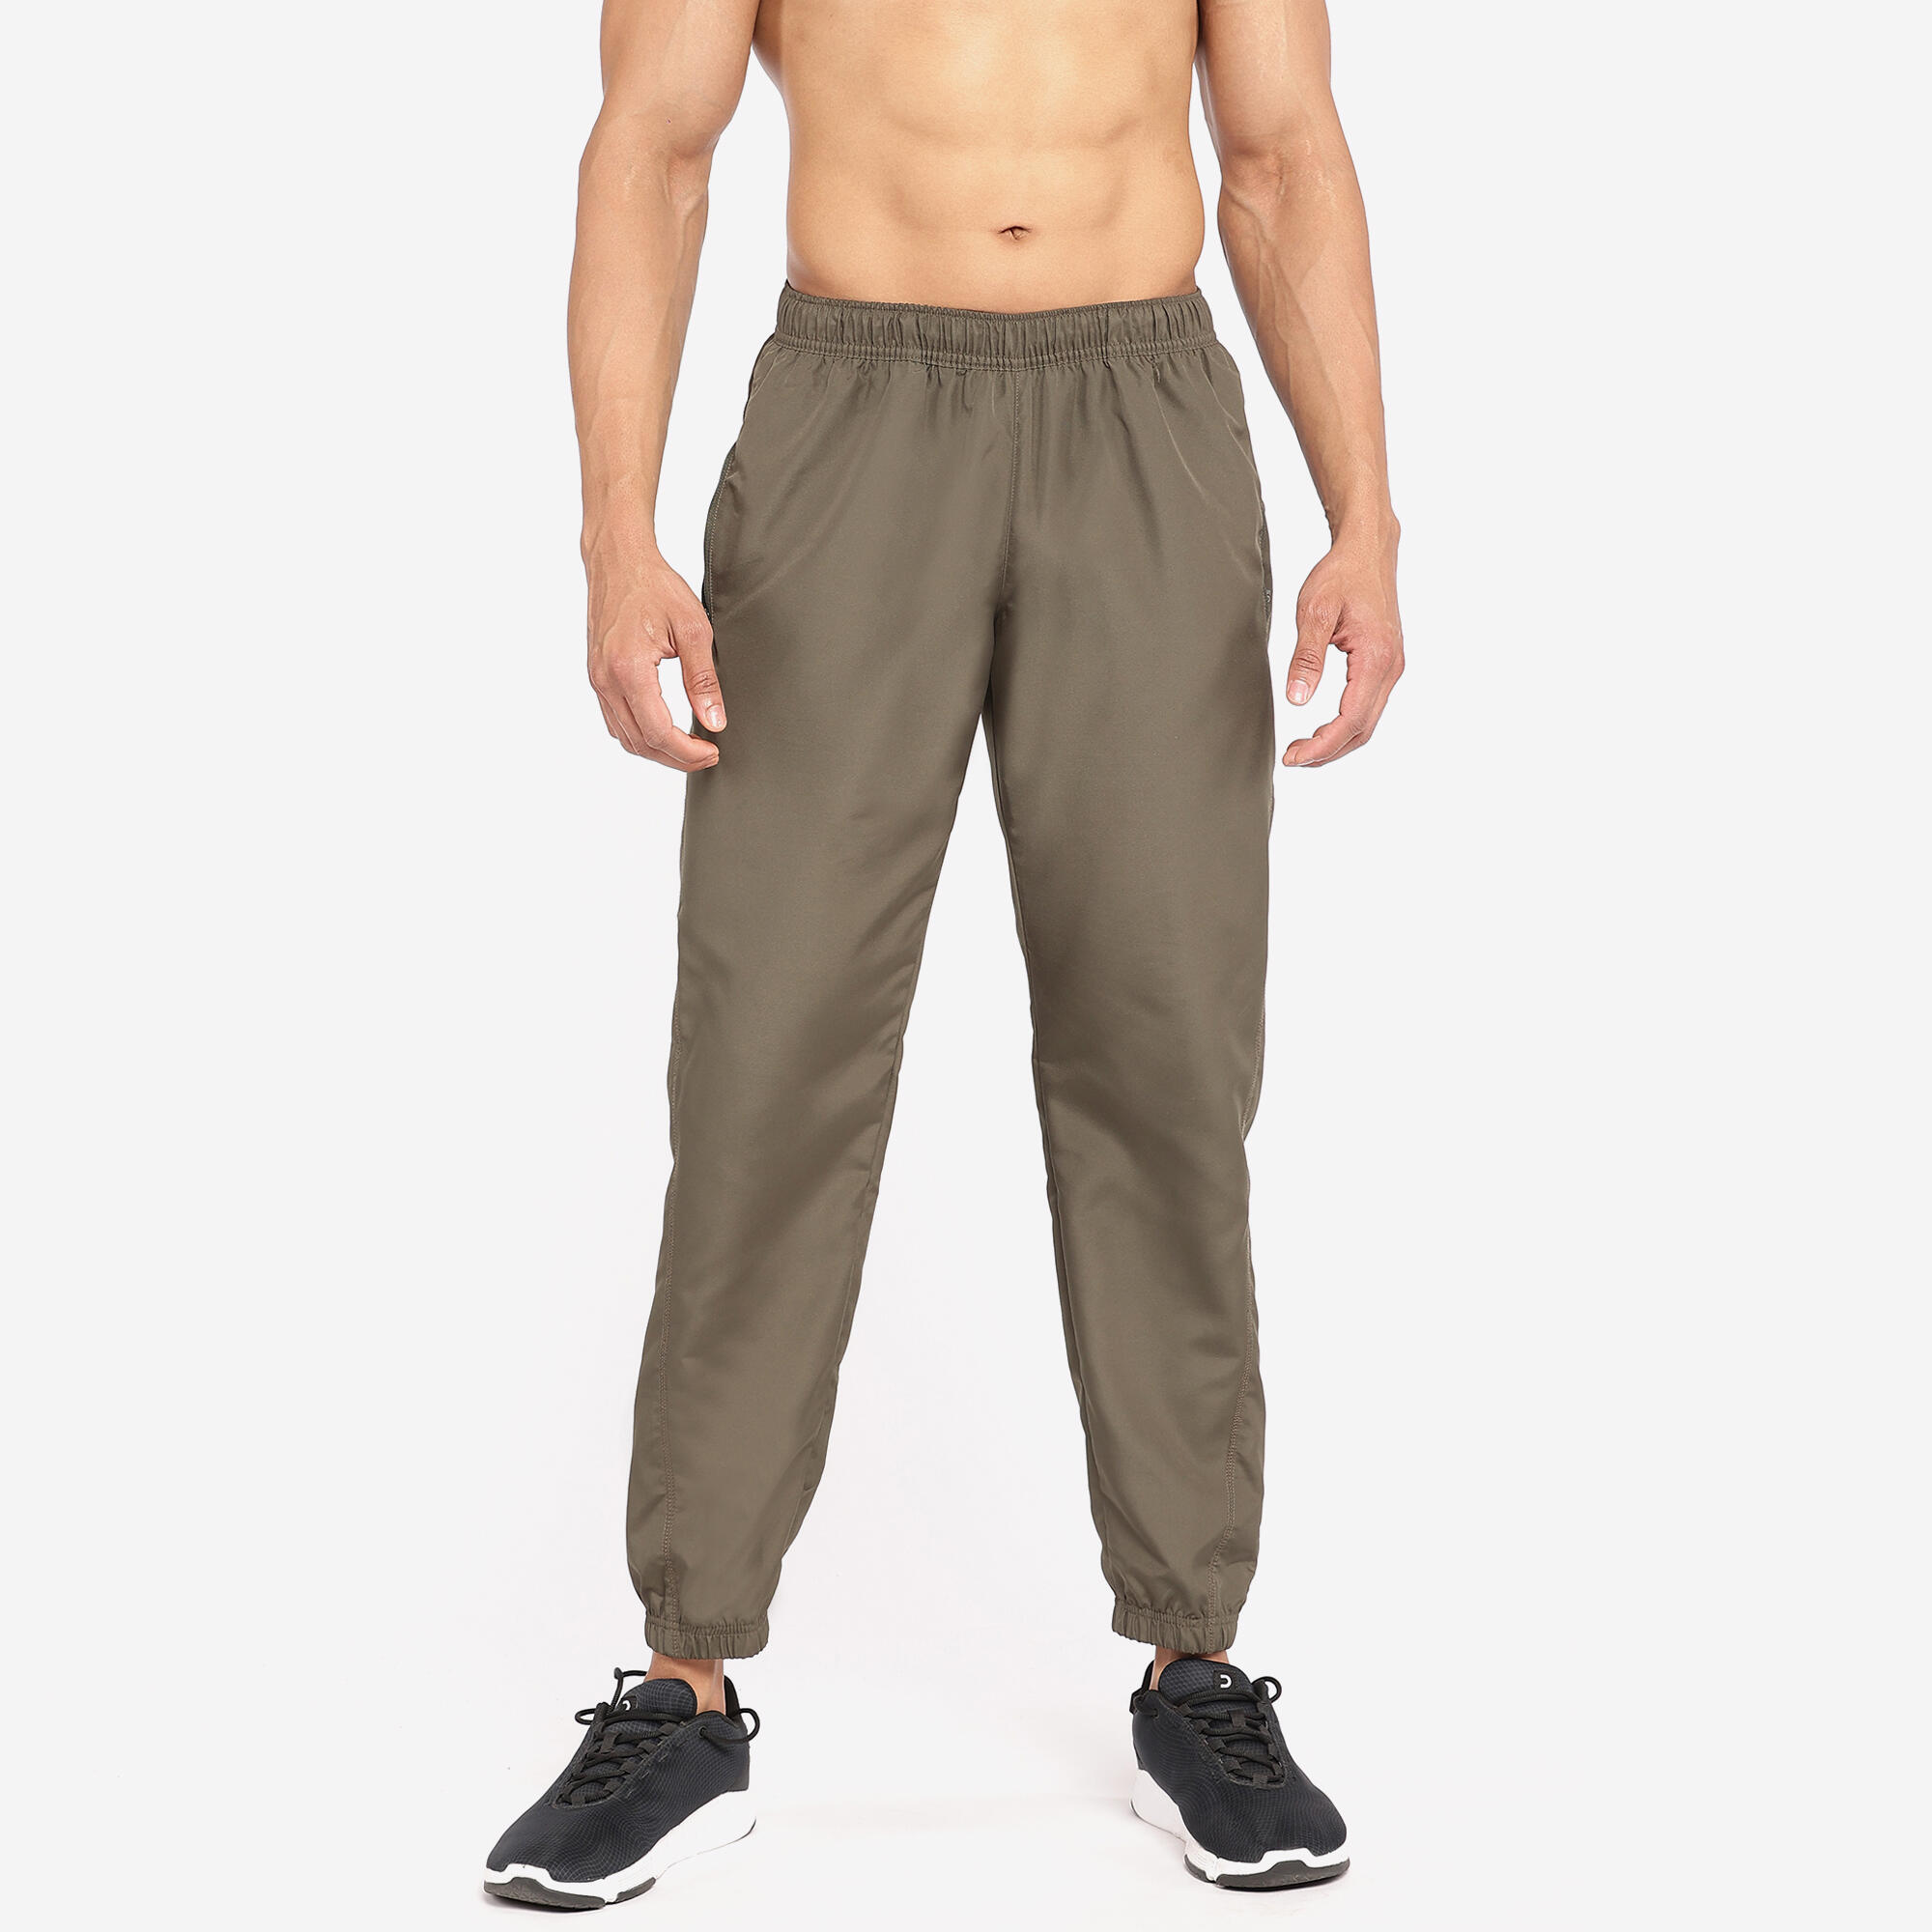 Buy Gym Track Pants for Women Online from Blissclub